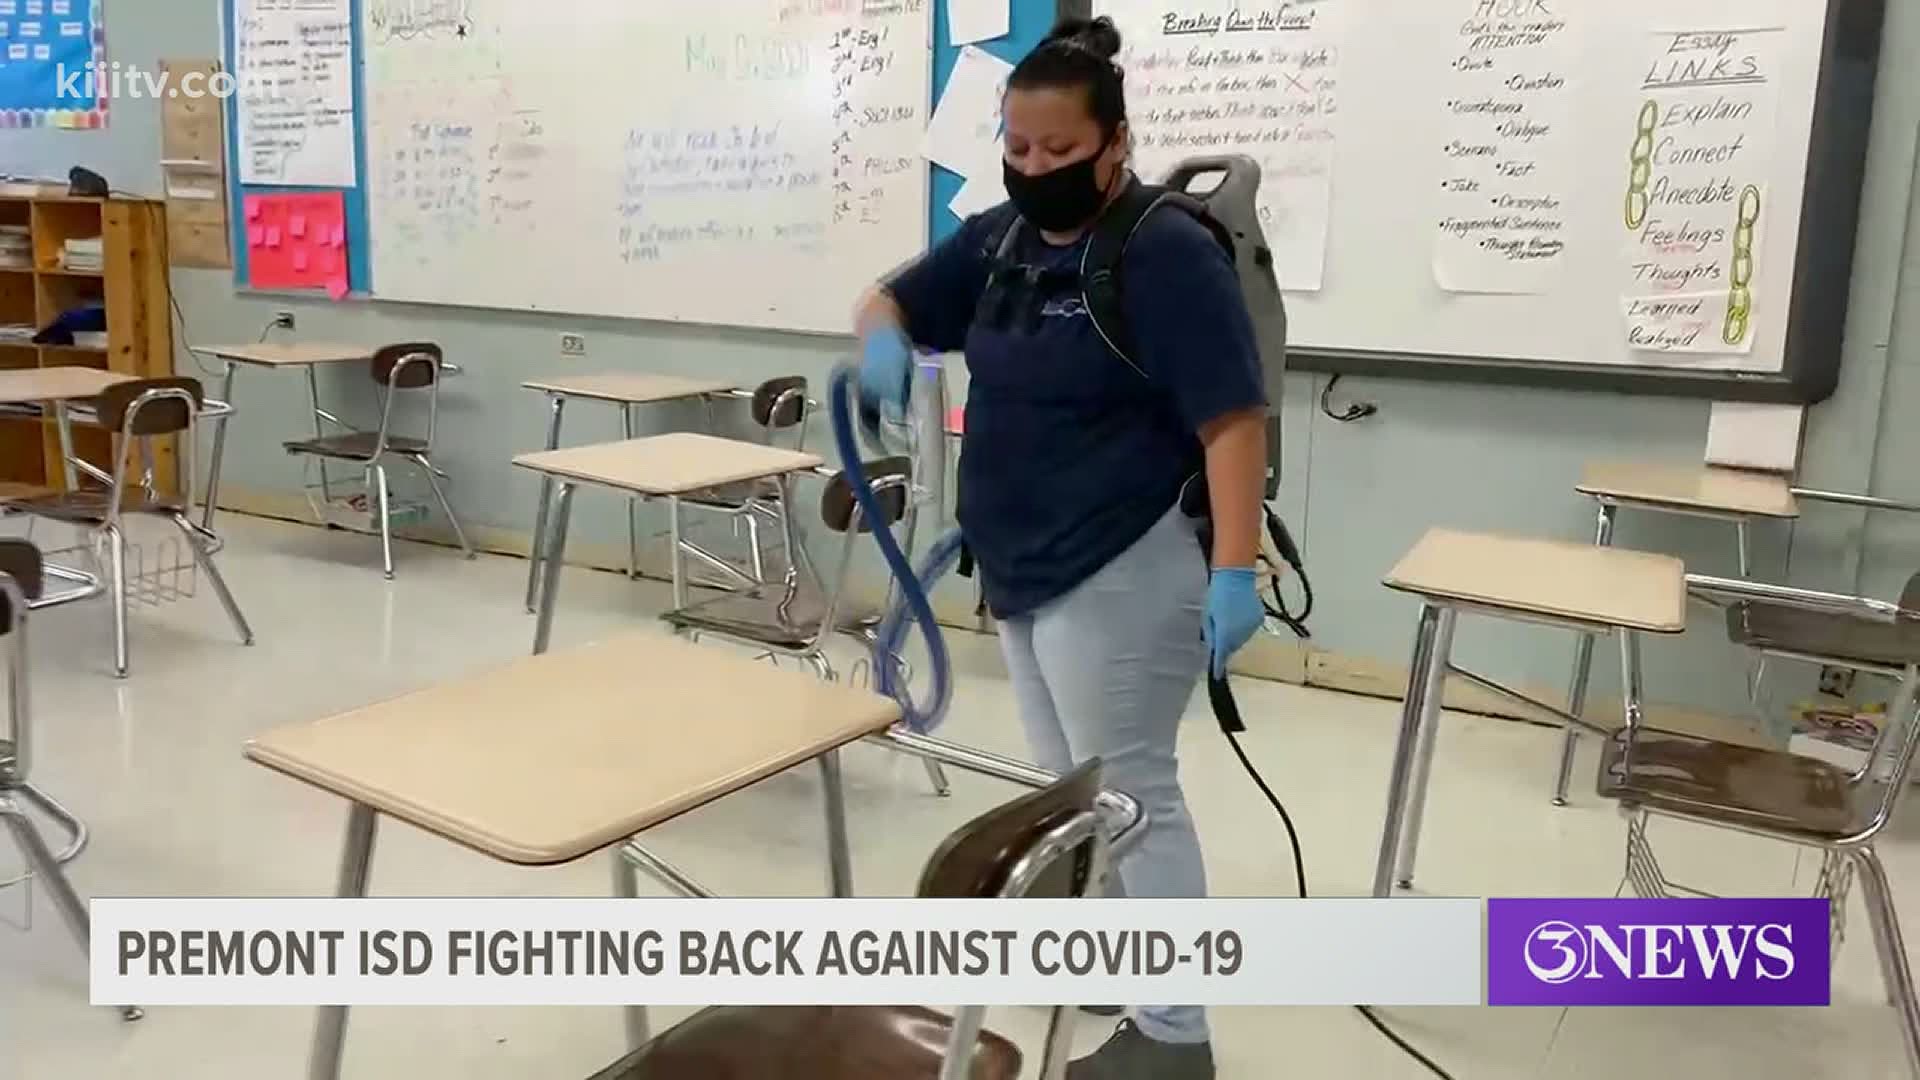 The entire school district complex is being sprayed down after a number of students showed up to school with COVID-19, along with one teacher.